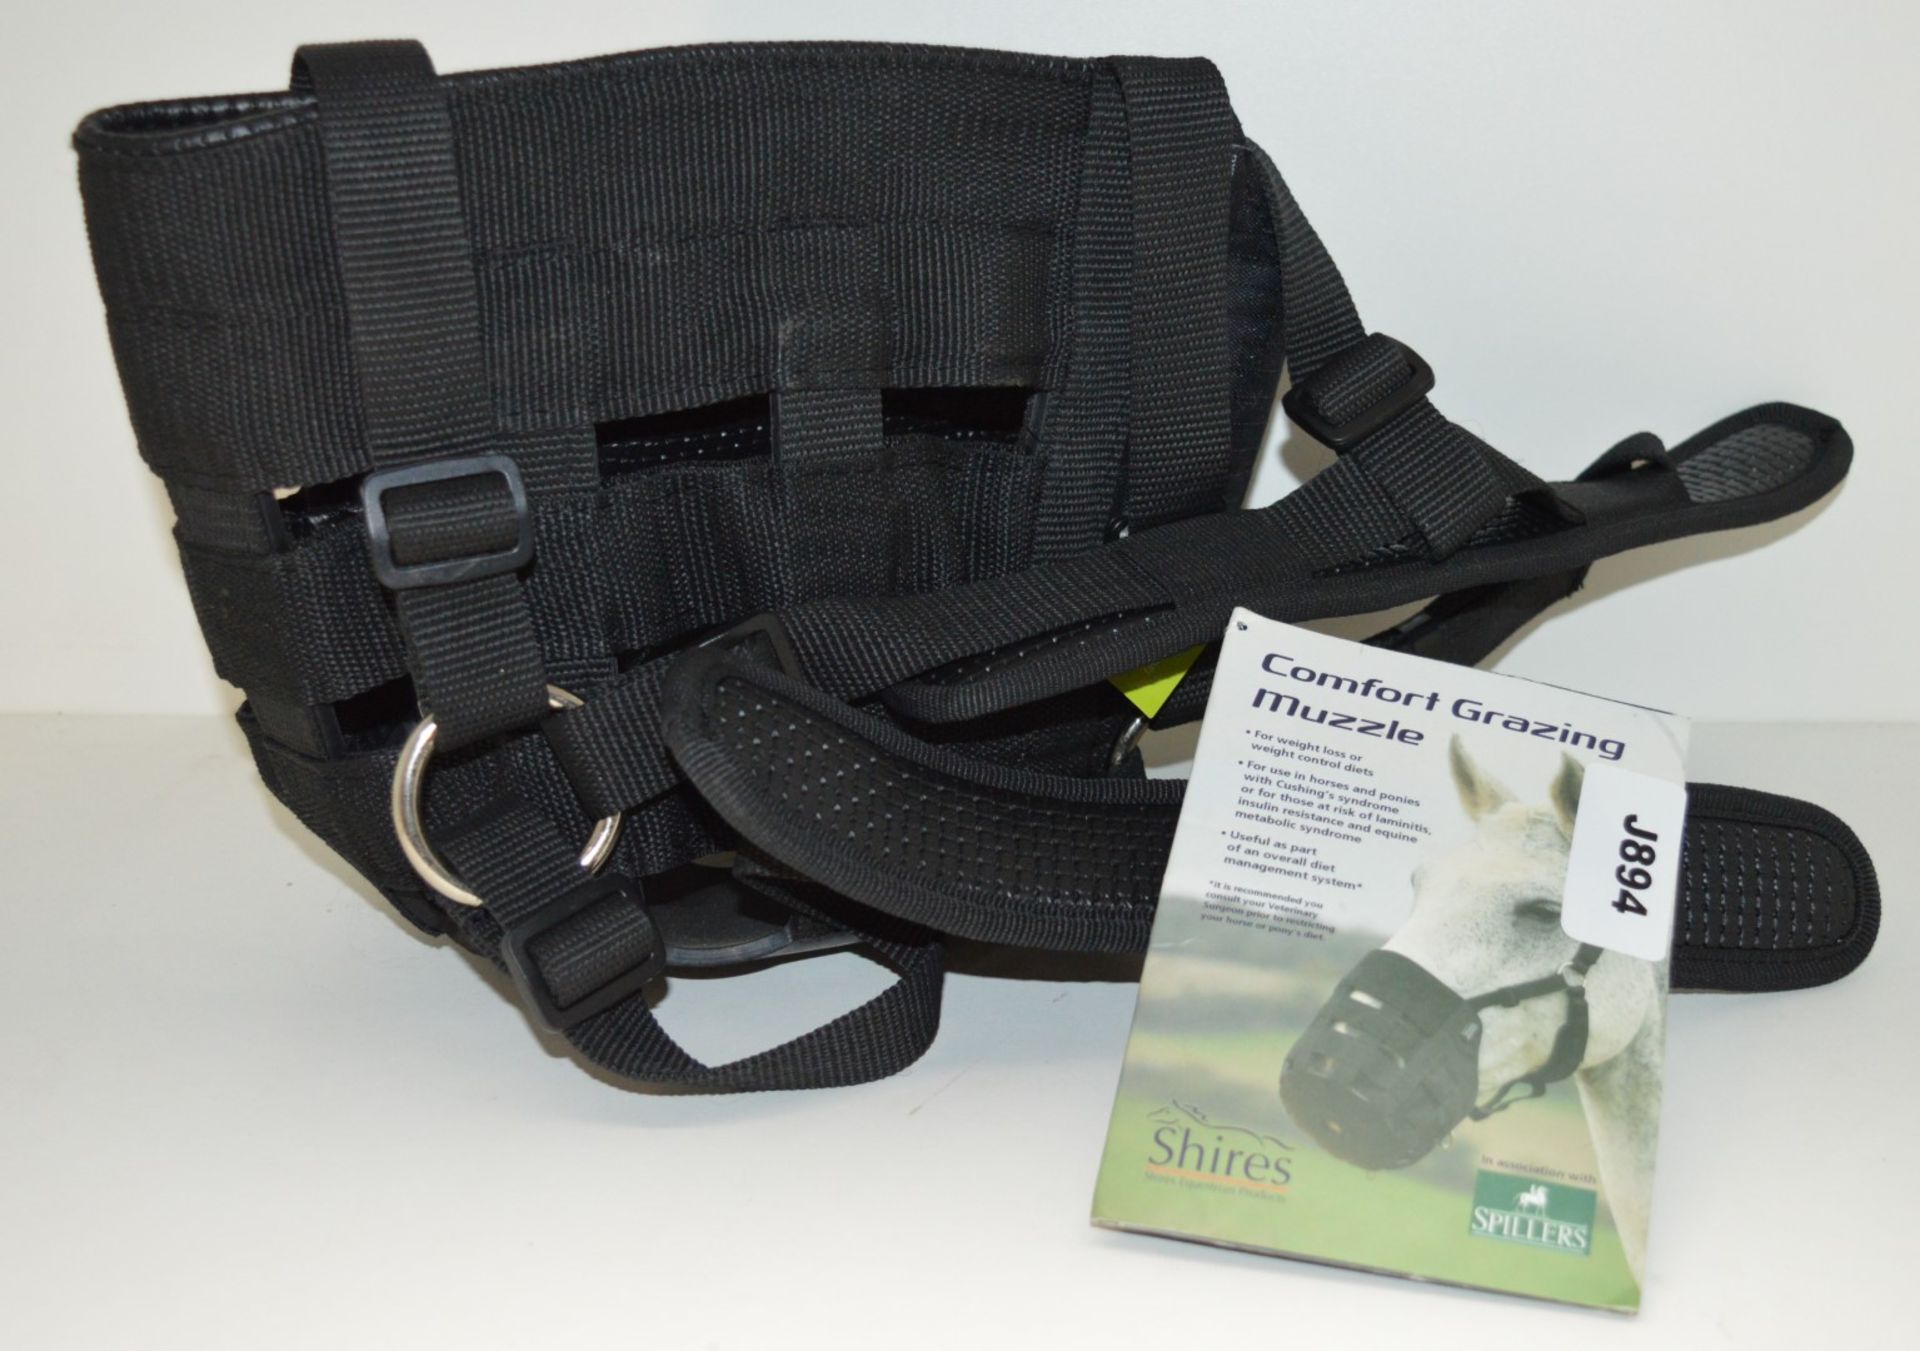 1 x Shires Comfort Grazing Muzzle - Full Size 495N Black - New Stock - CL401 - Ref J894 - - Image 2 of 4